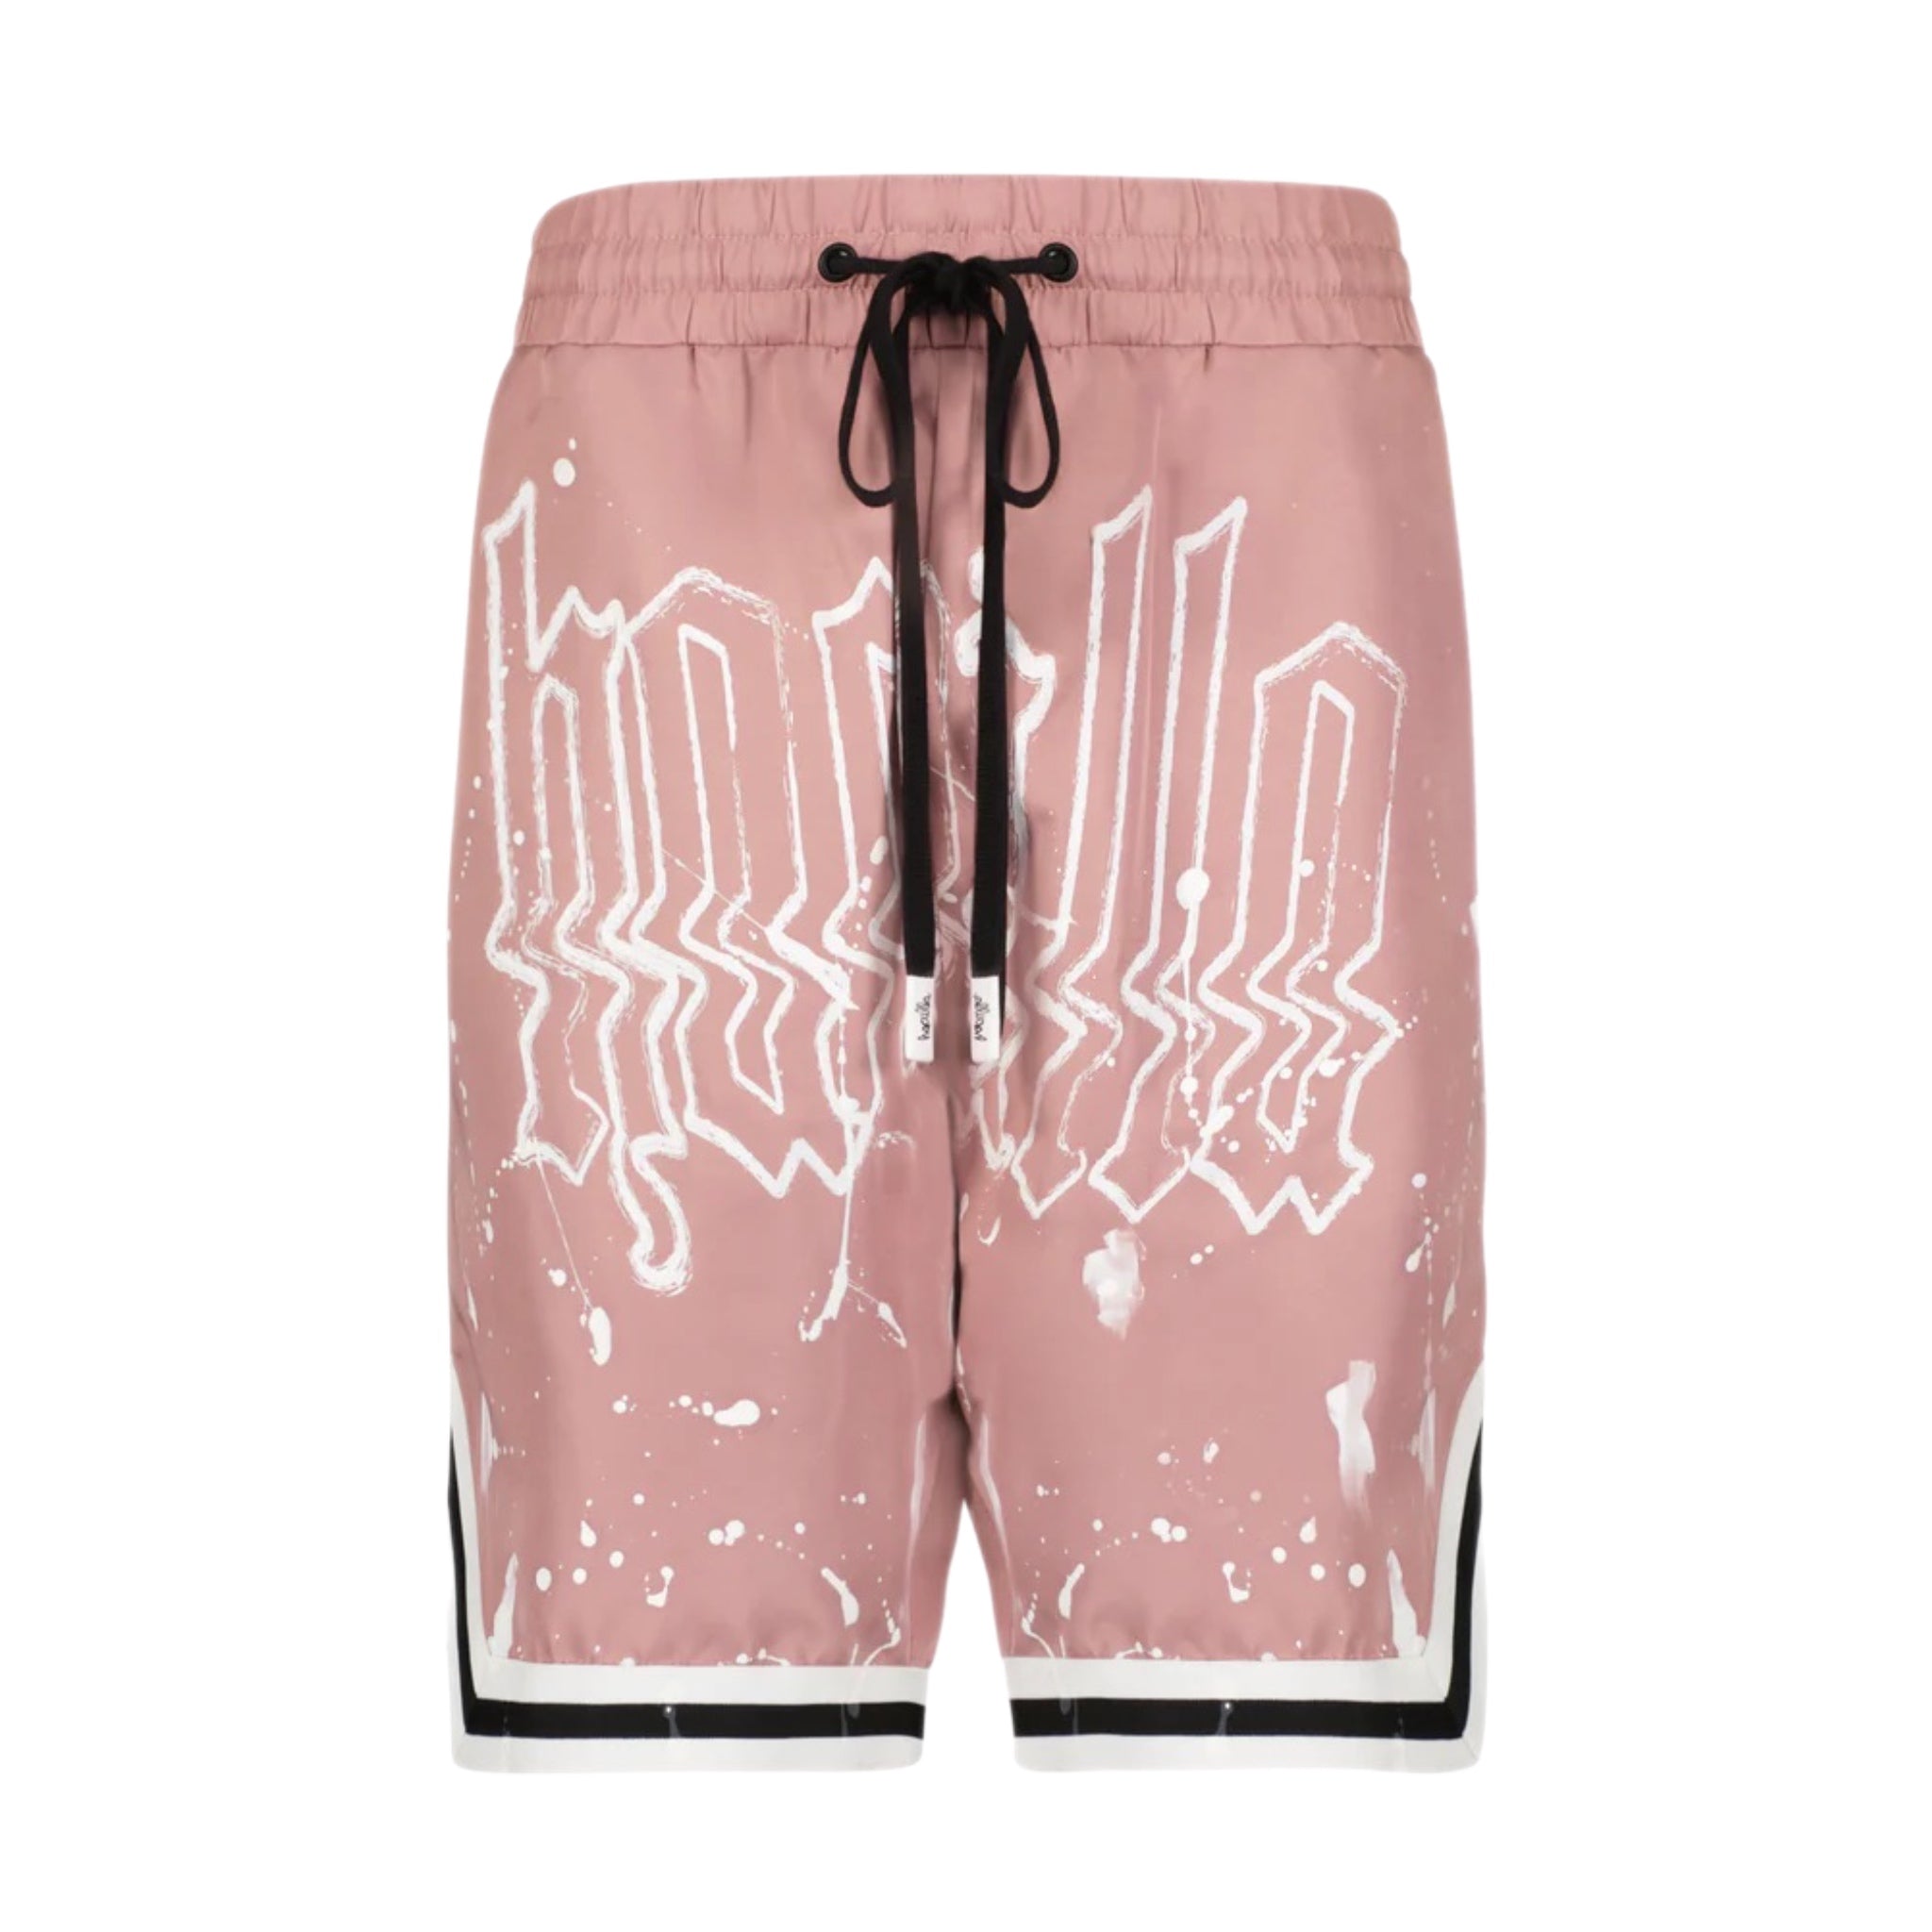 HACULLA SMOTHERED IN PAINT BASKETBALL SHORT